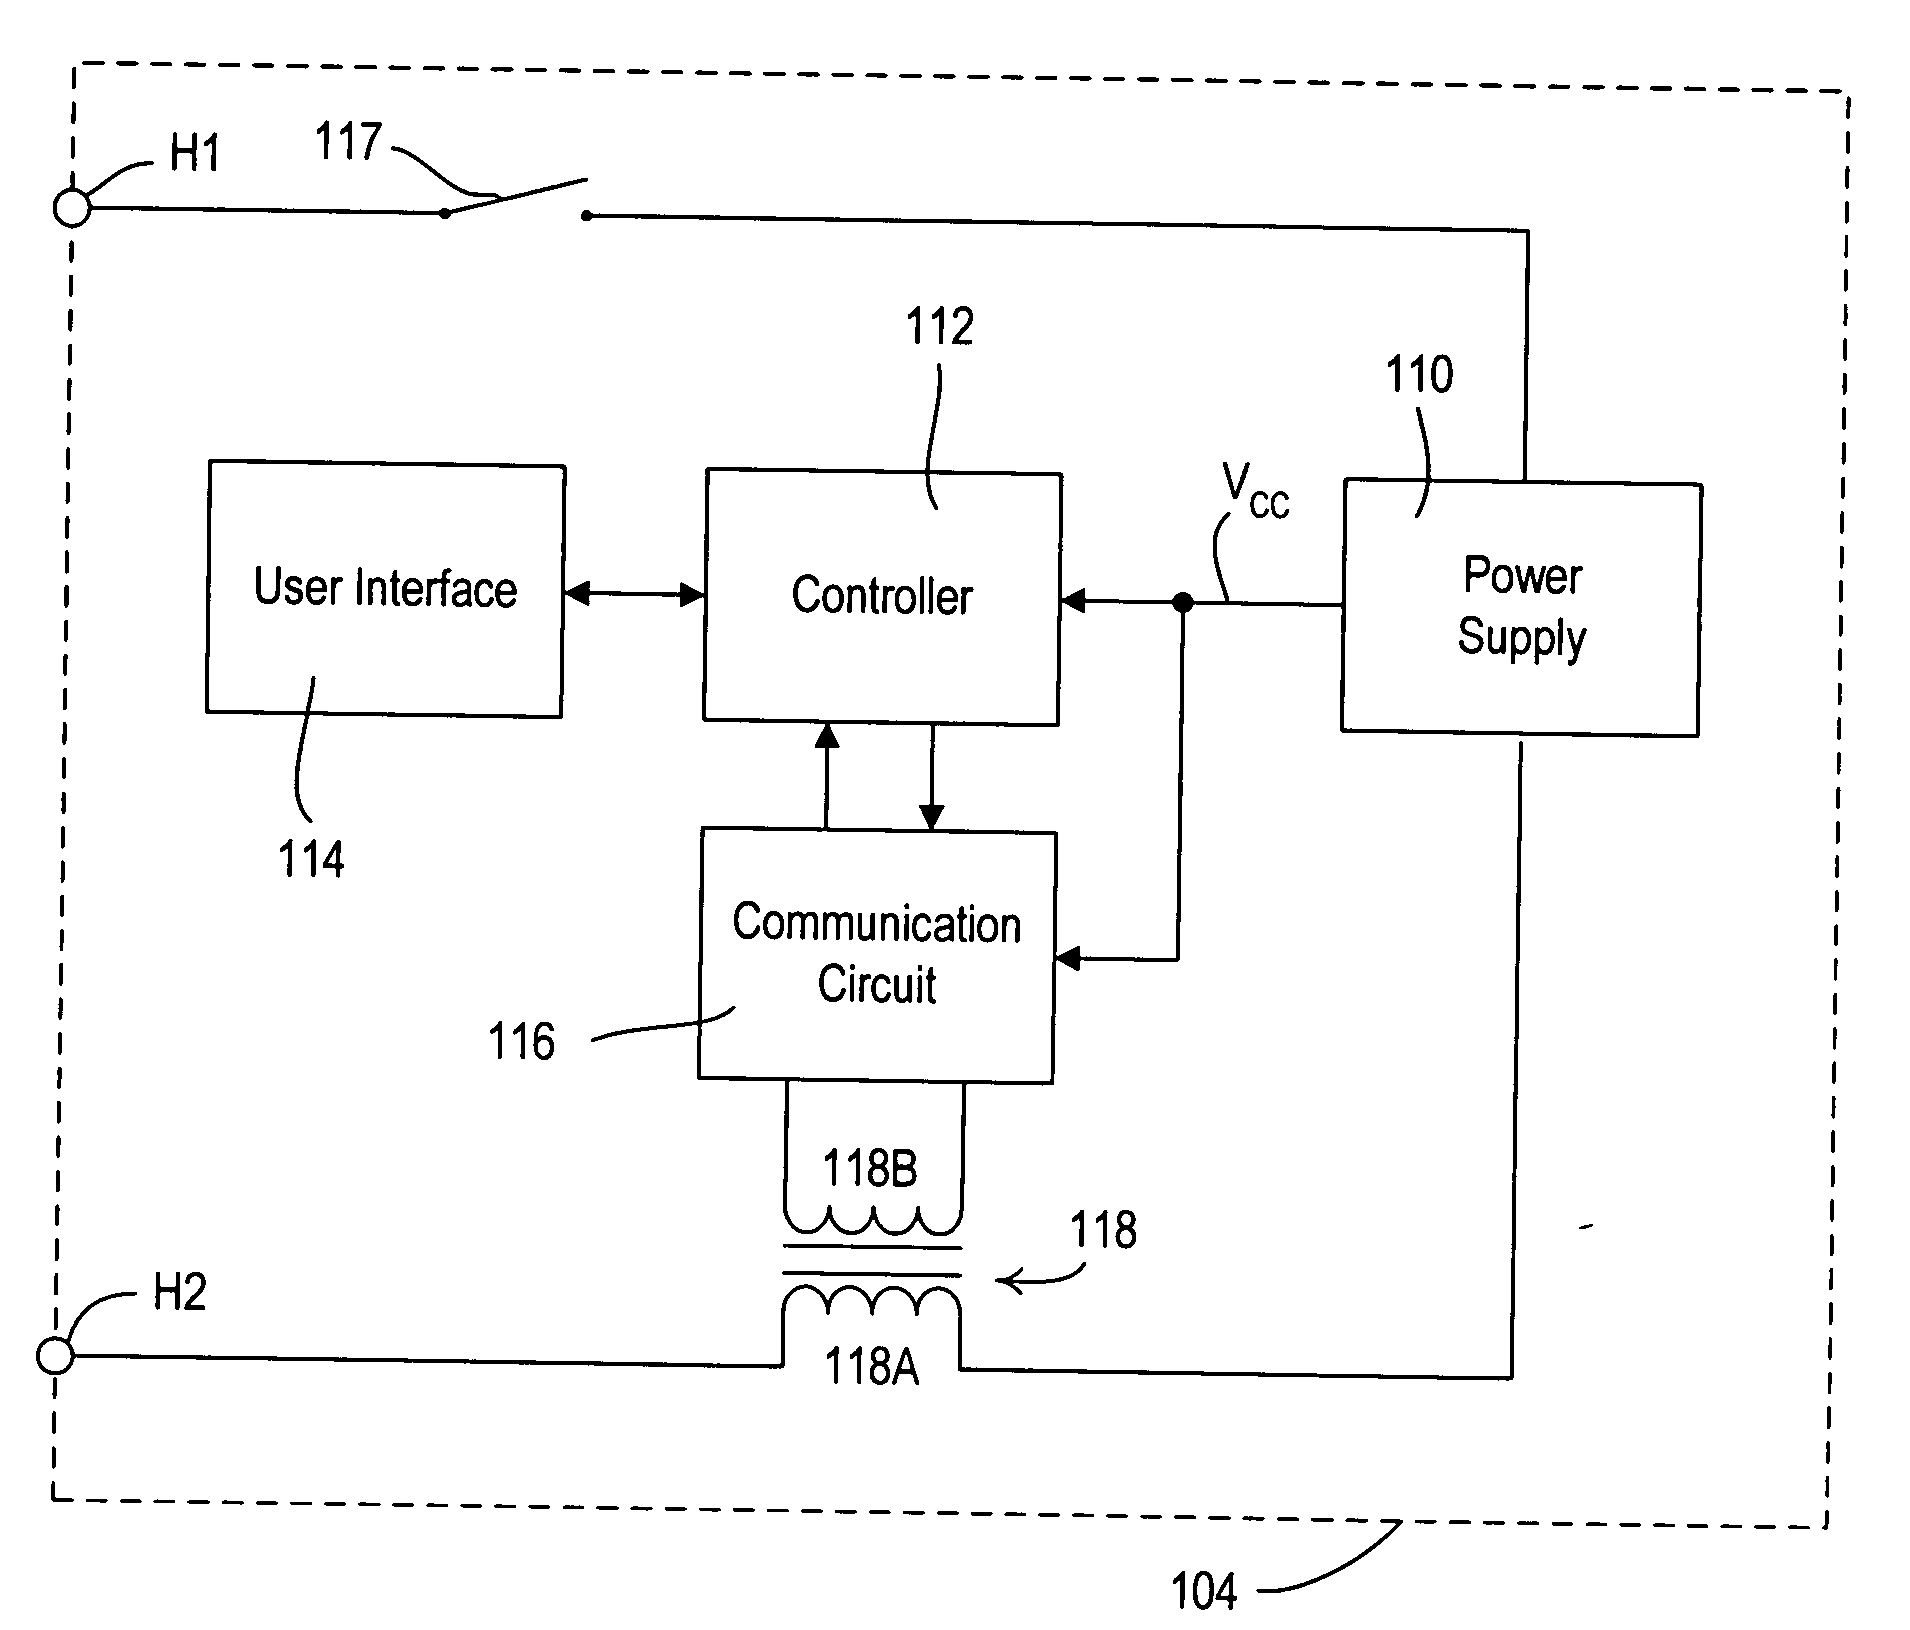 System for control of lights and motors